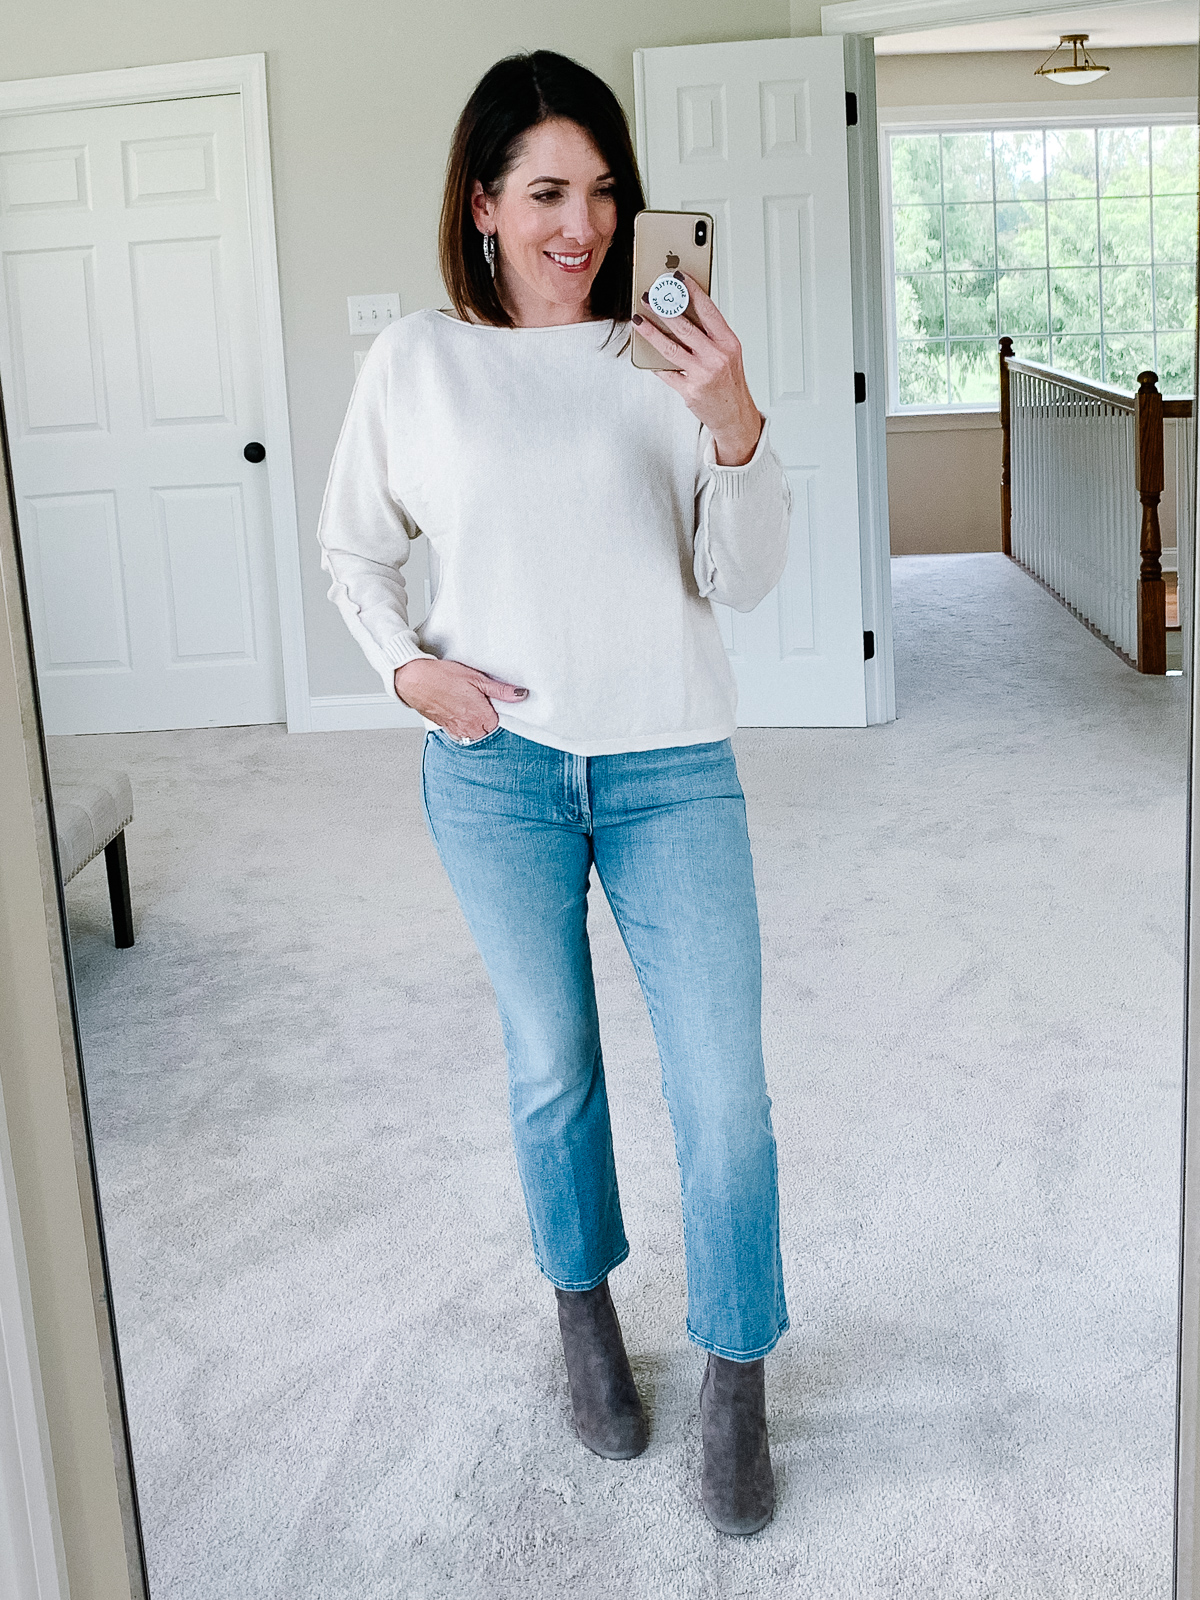 Fall Try-On Haul: Amazon, Ann Taylor, J.Crew & Nordstrom